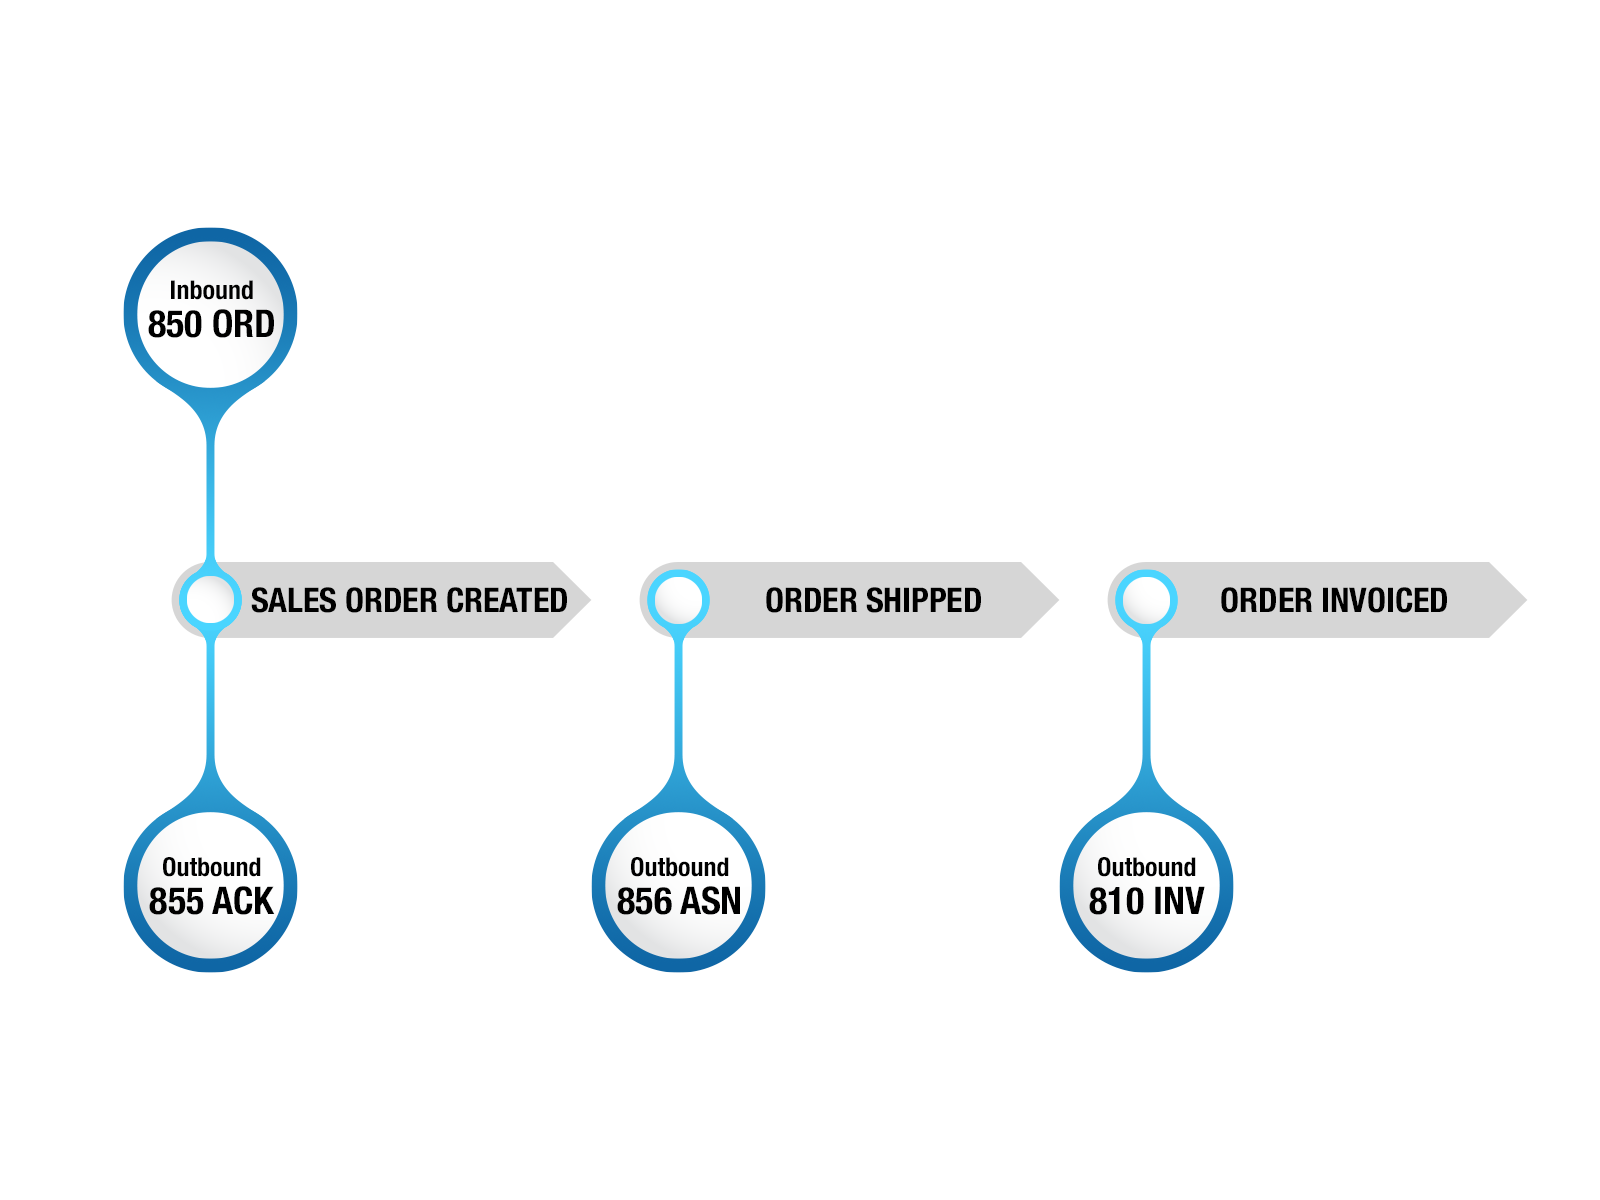 Sales process with EDI transactions